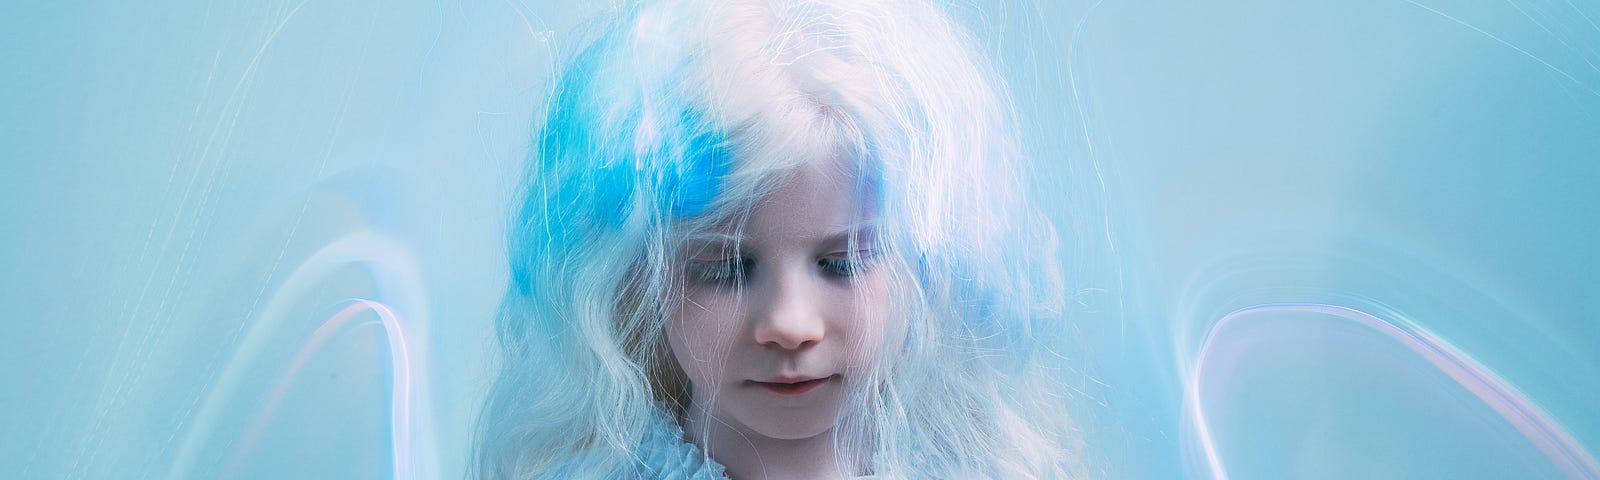 A small girl with blonde hair is looking down. The background is a pale blue with shimmers of pastels.